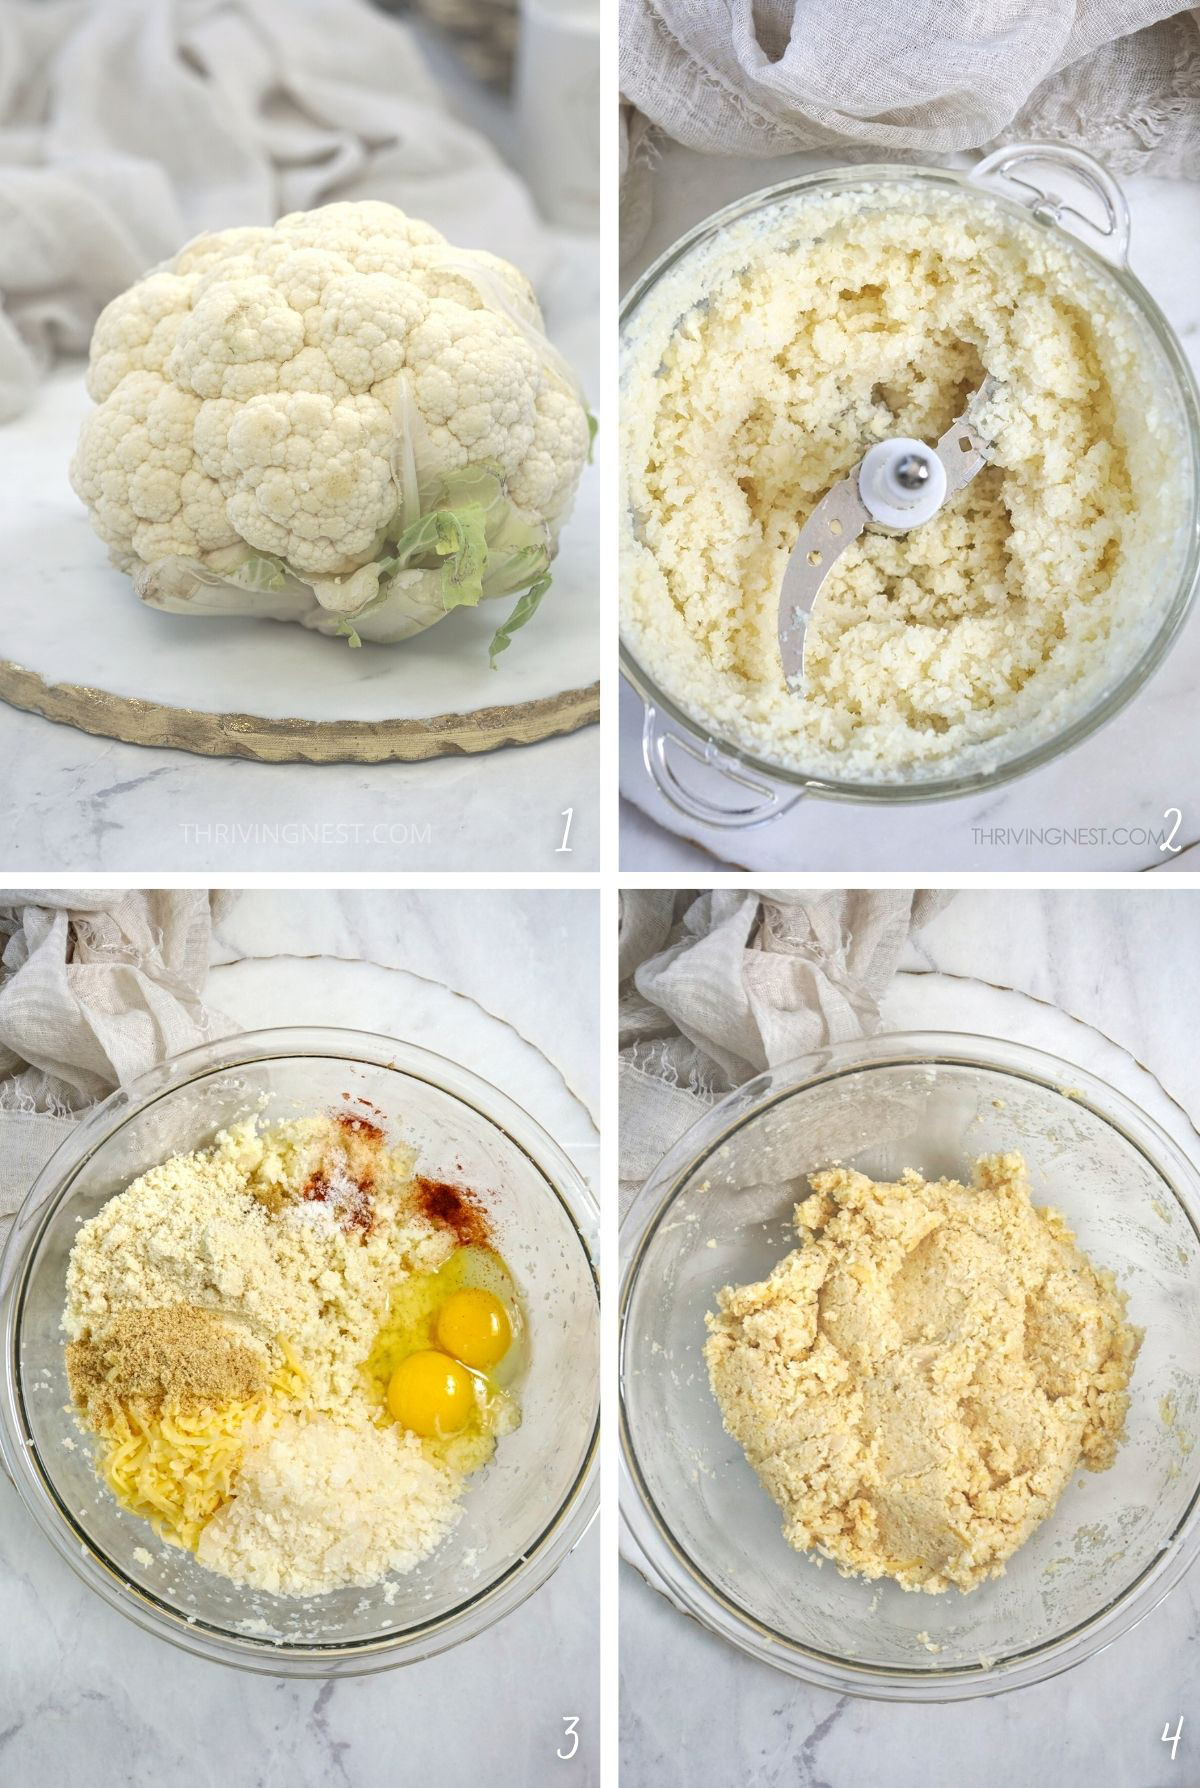 How to make cauliflower thins step by step process shots: make cauliflower rice first then mix the rest of ingredients.